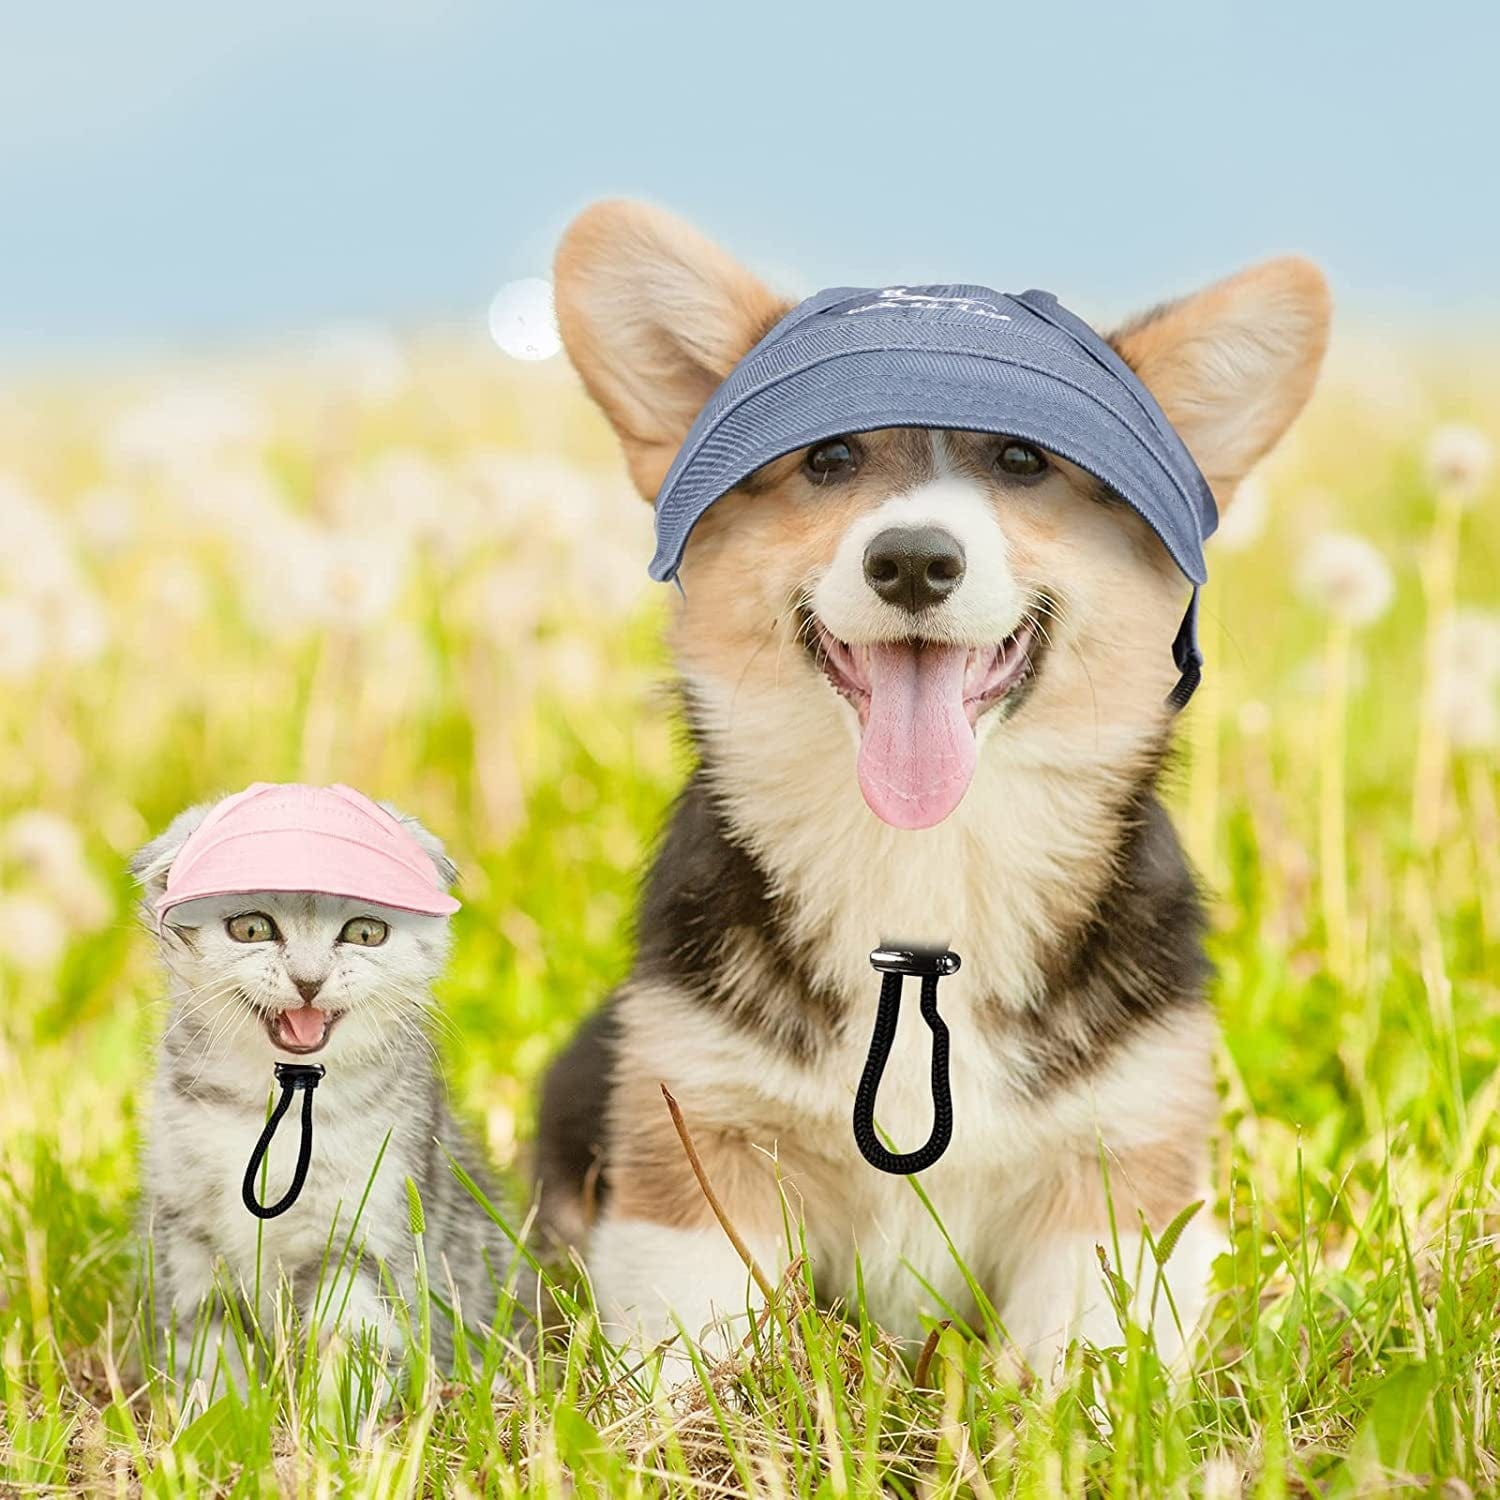 2 Pieces Dog Baseball Cap Pet Hats for Dogs Outdoor Pet Adjustable